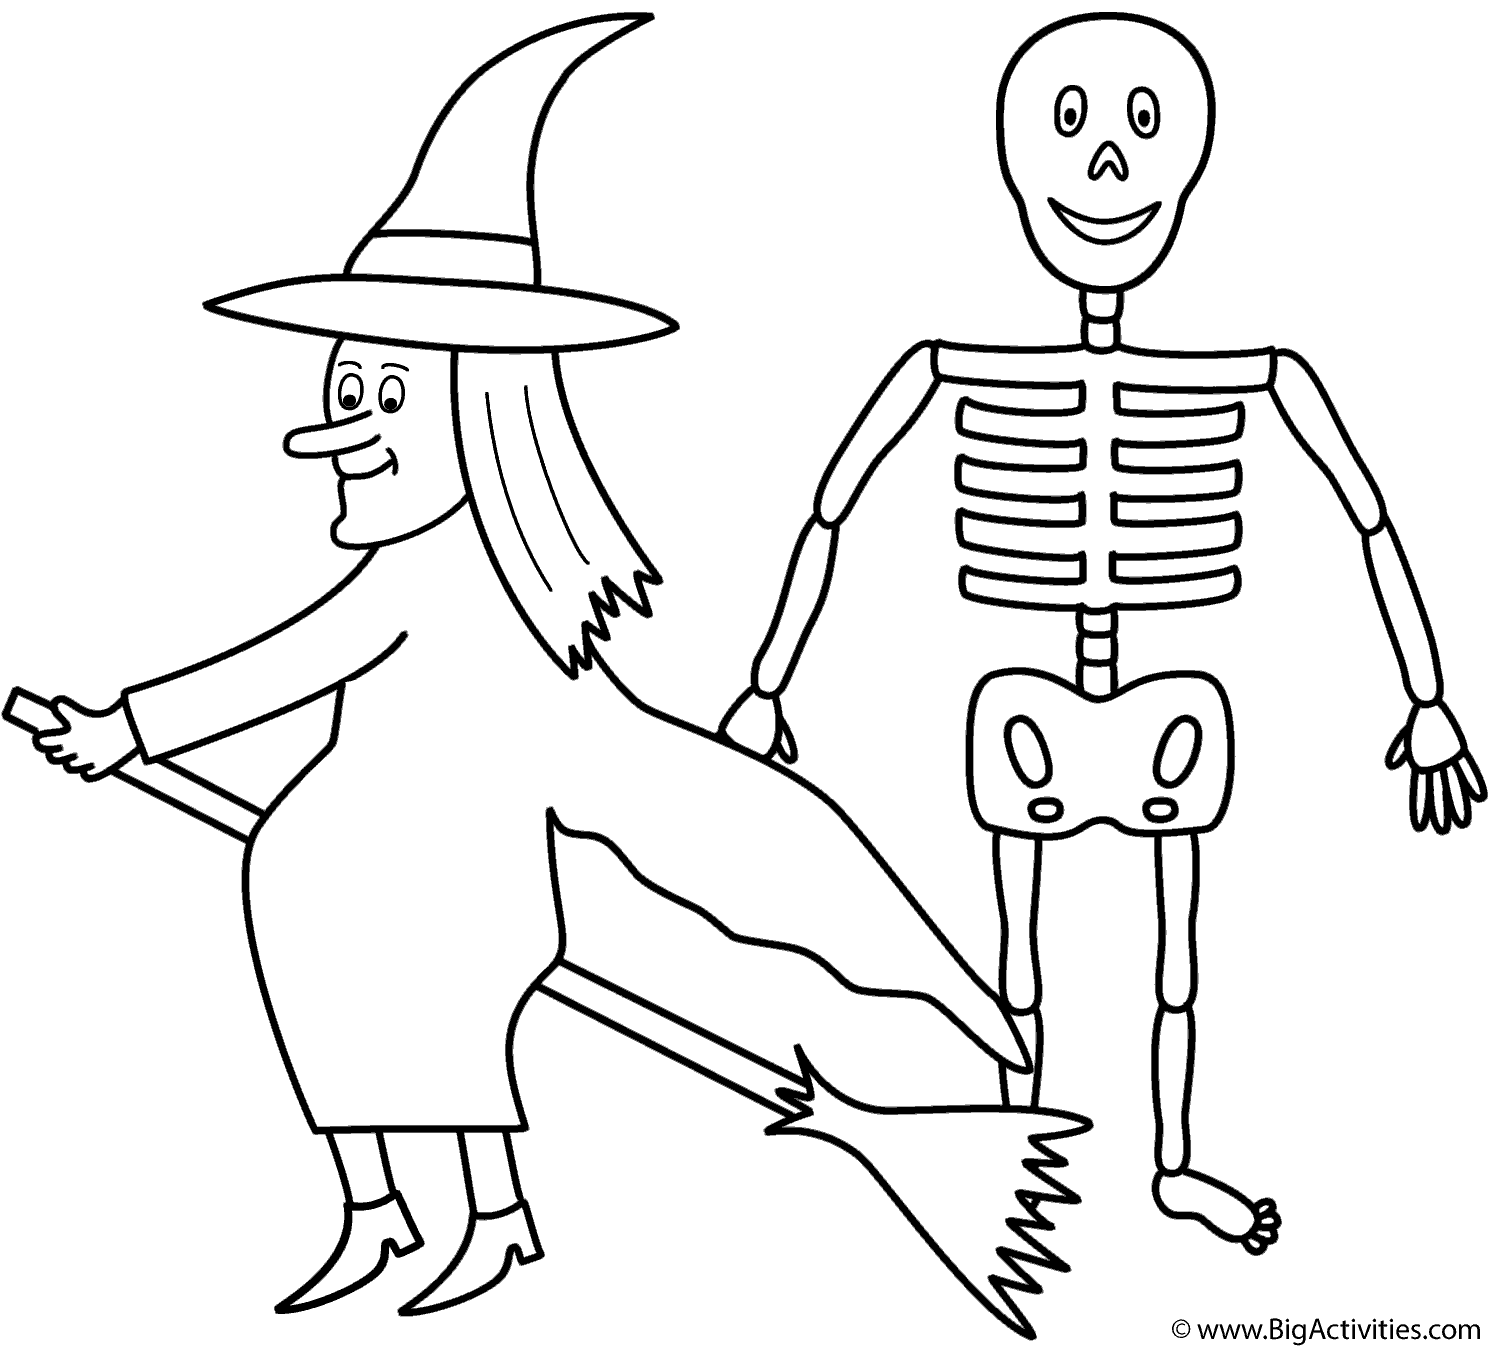 Witch with skeleton - Coloring Page (Halloween)